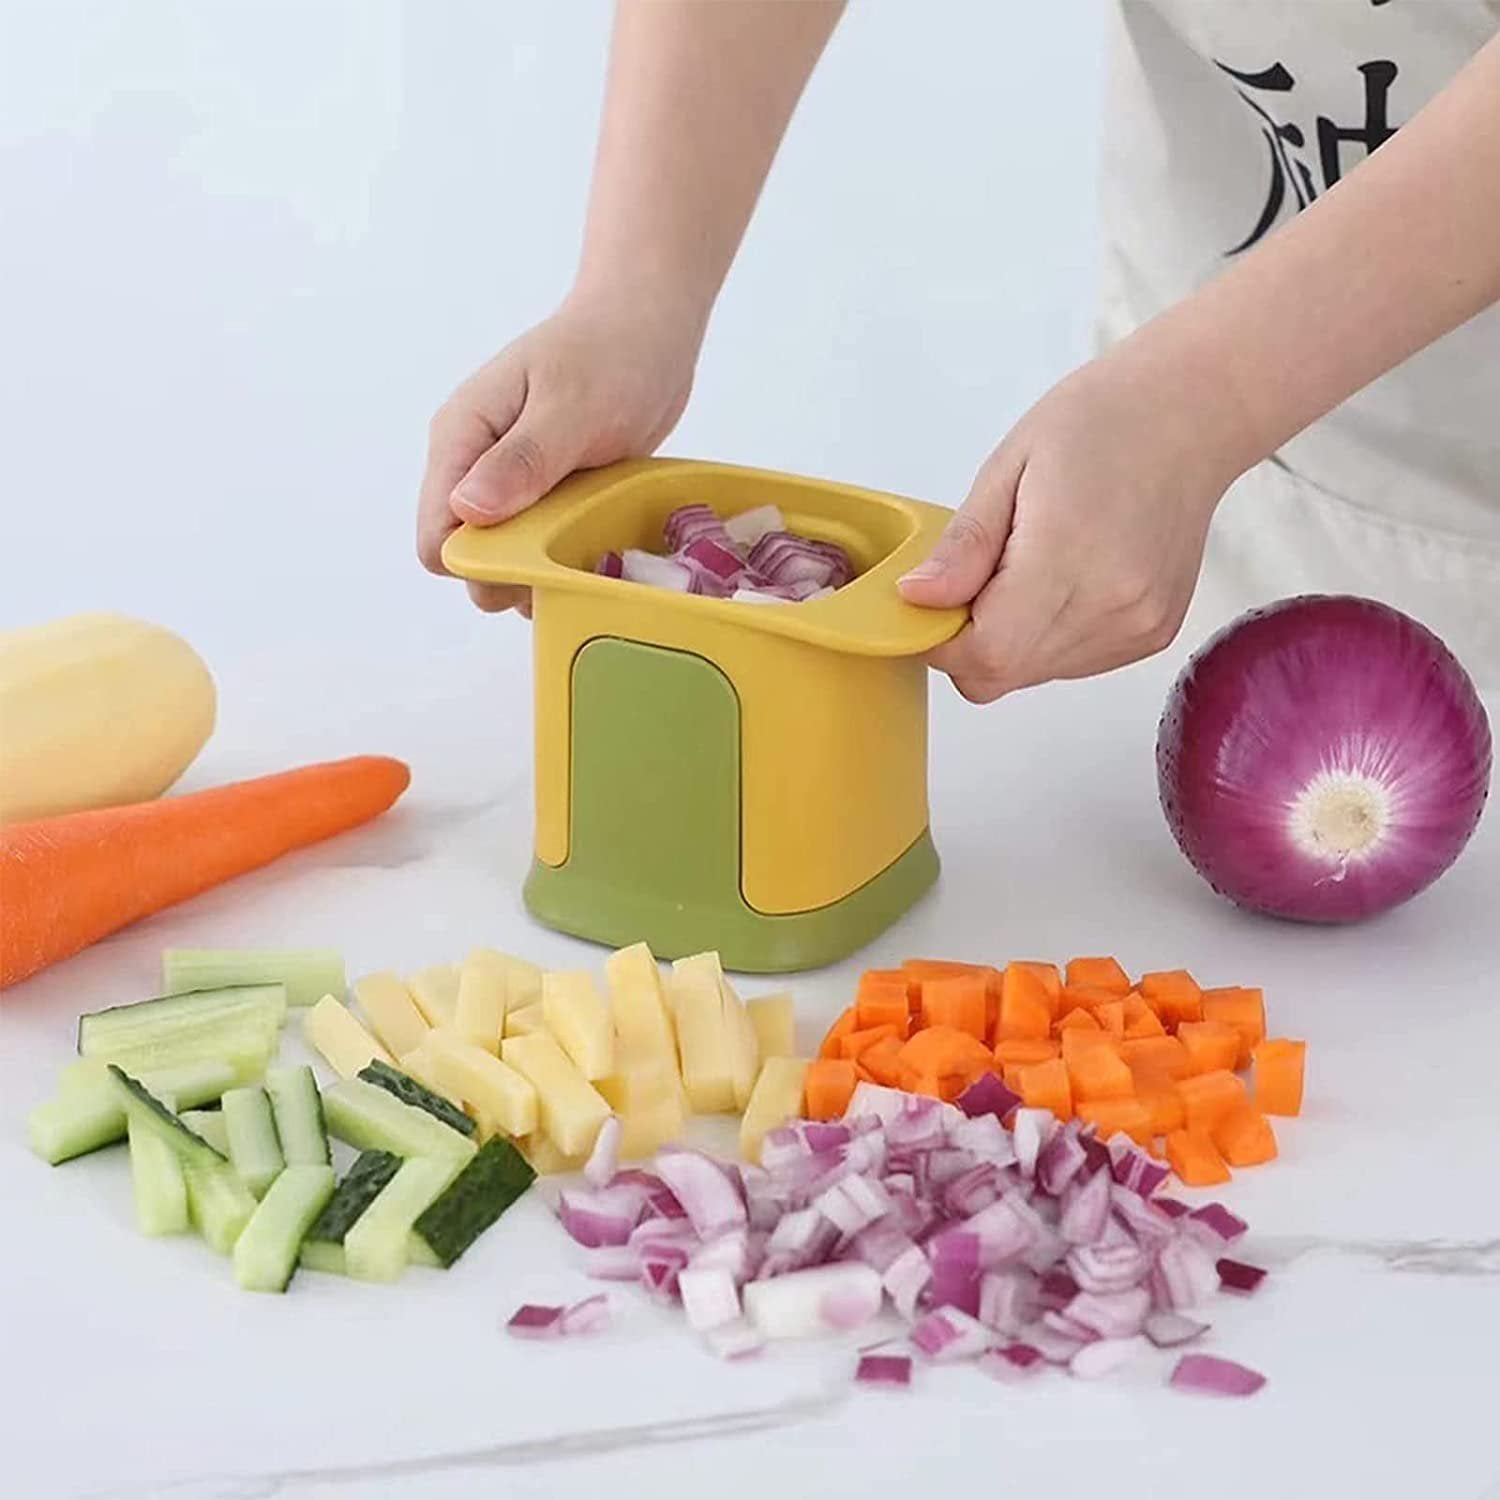 ZUMUSEN 2 In 1 Vegetable Chopper For Dicing And Dividing,Slicer